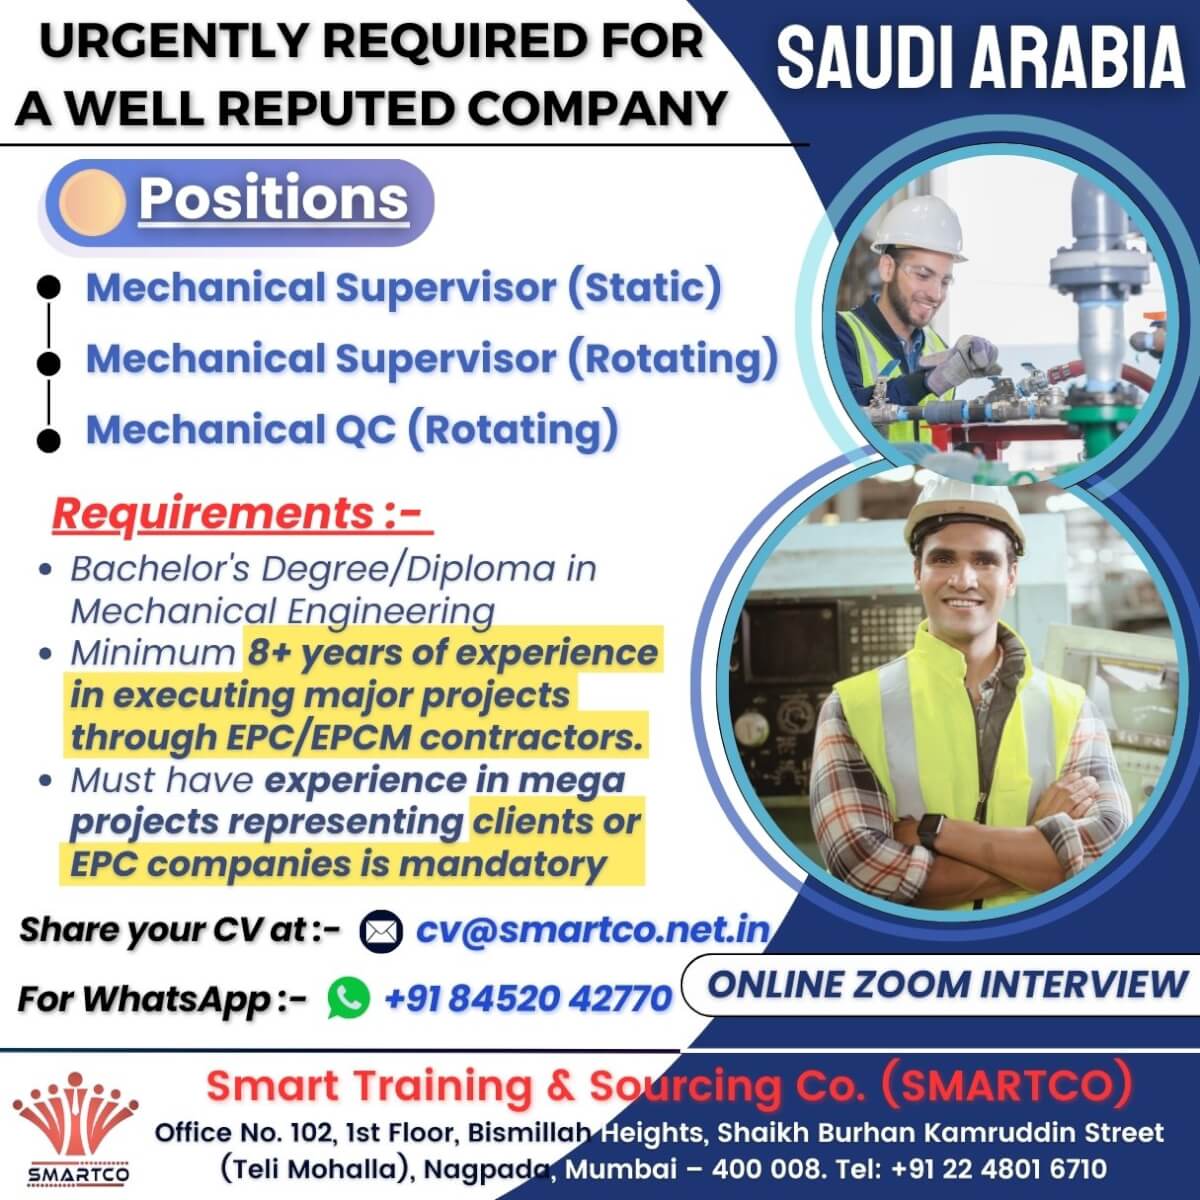 URGENTLY REQUIRED FOR SAUDI ARABIA A WELL REPUTED COMPANY